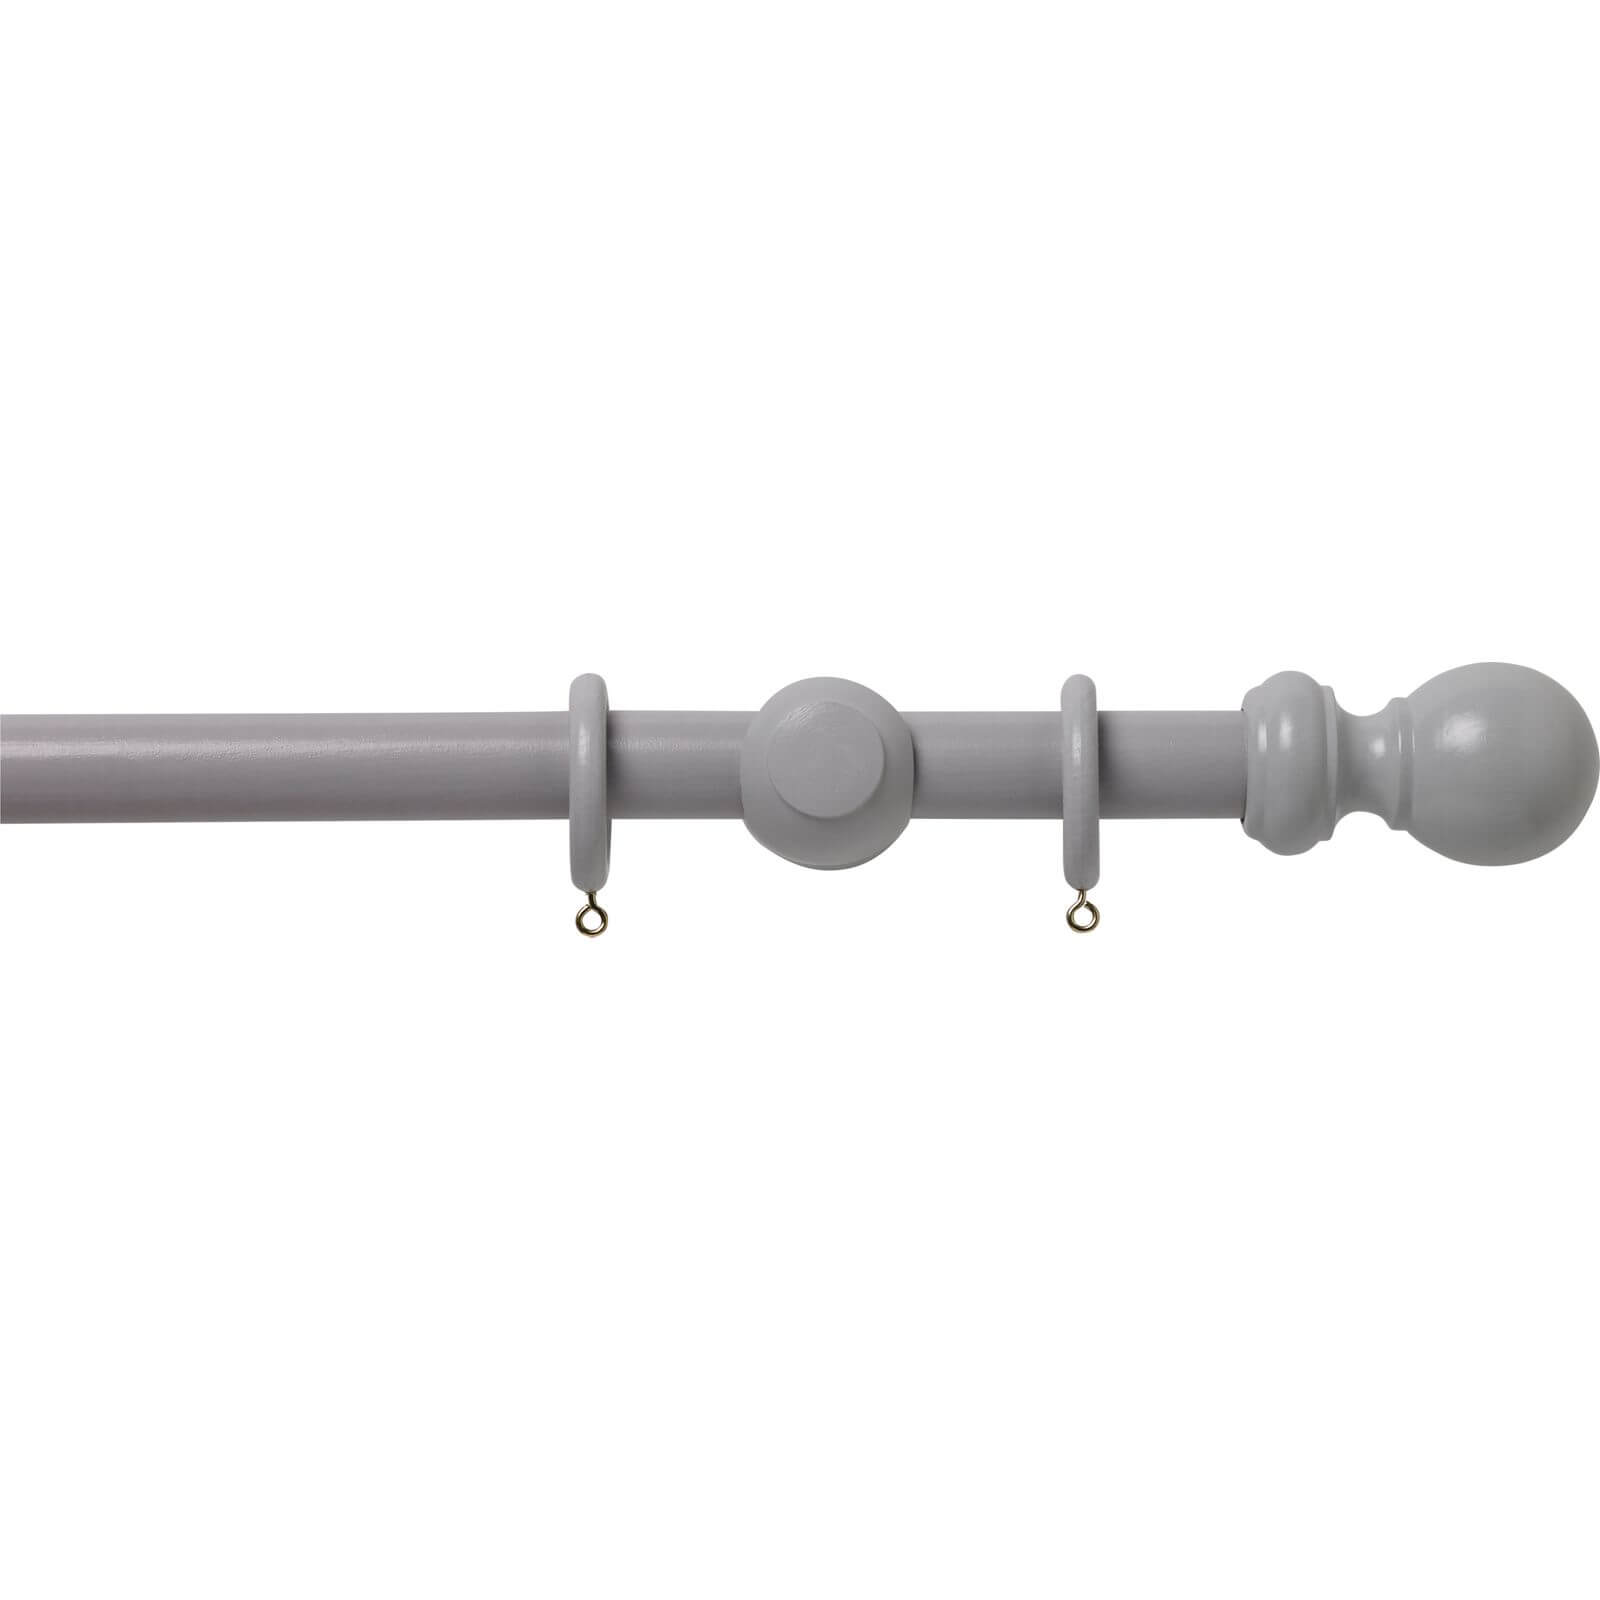 Photo of Grey Wood 28mm Curtain Pole With Ball Finials - 2.4m